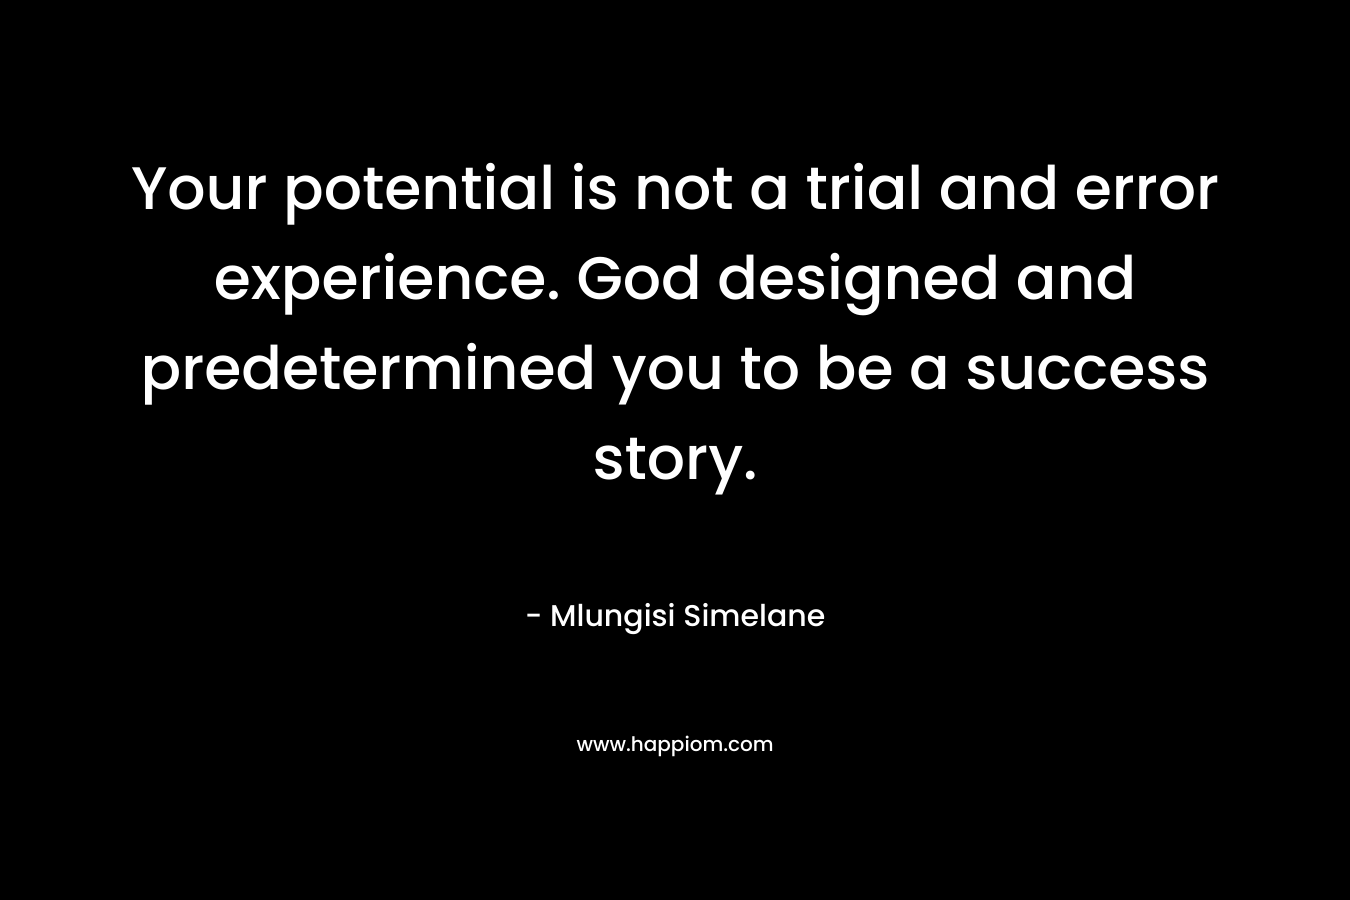 Your potential is not a trial and error experience. God designed and predetermined you to be a success story. – Mlungisi Simelane